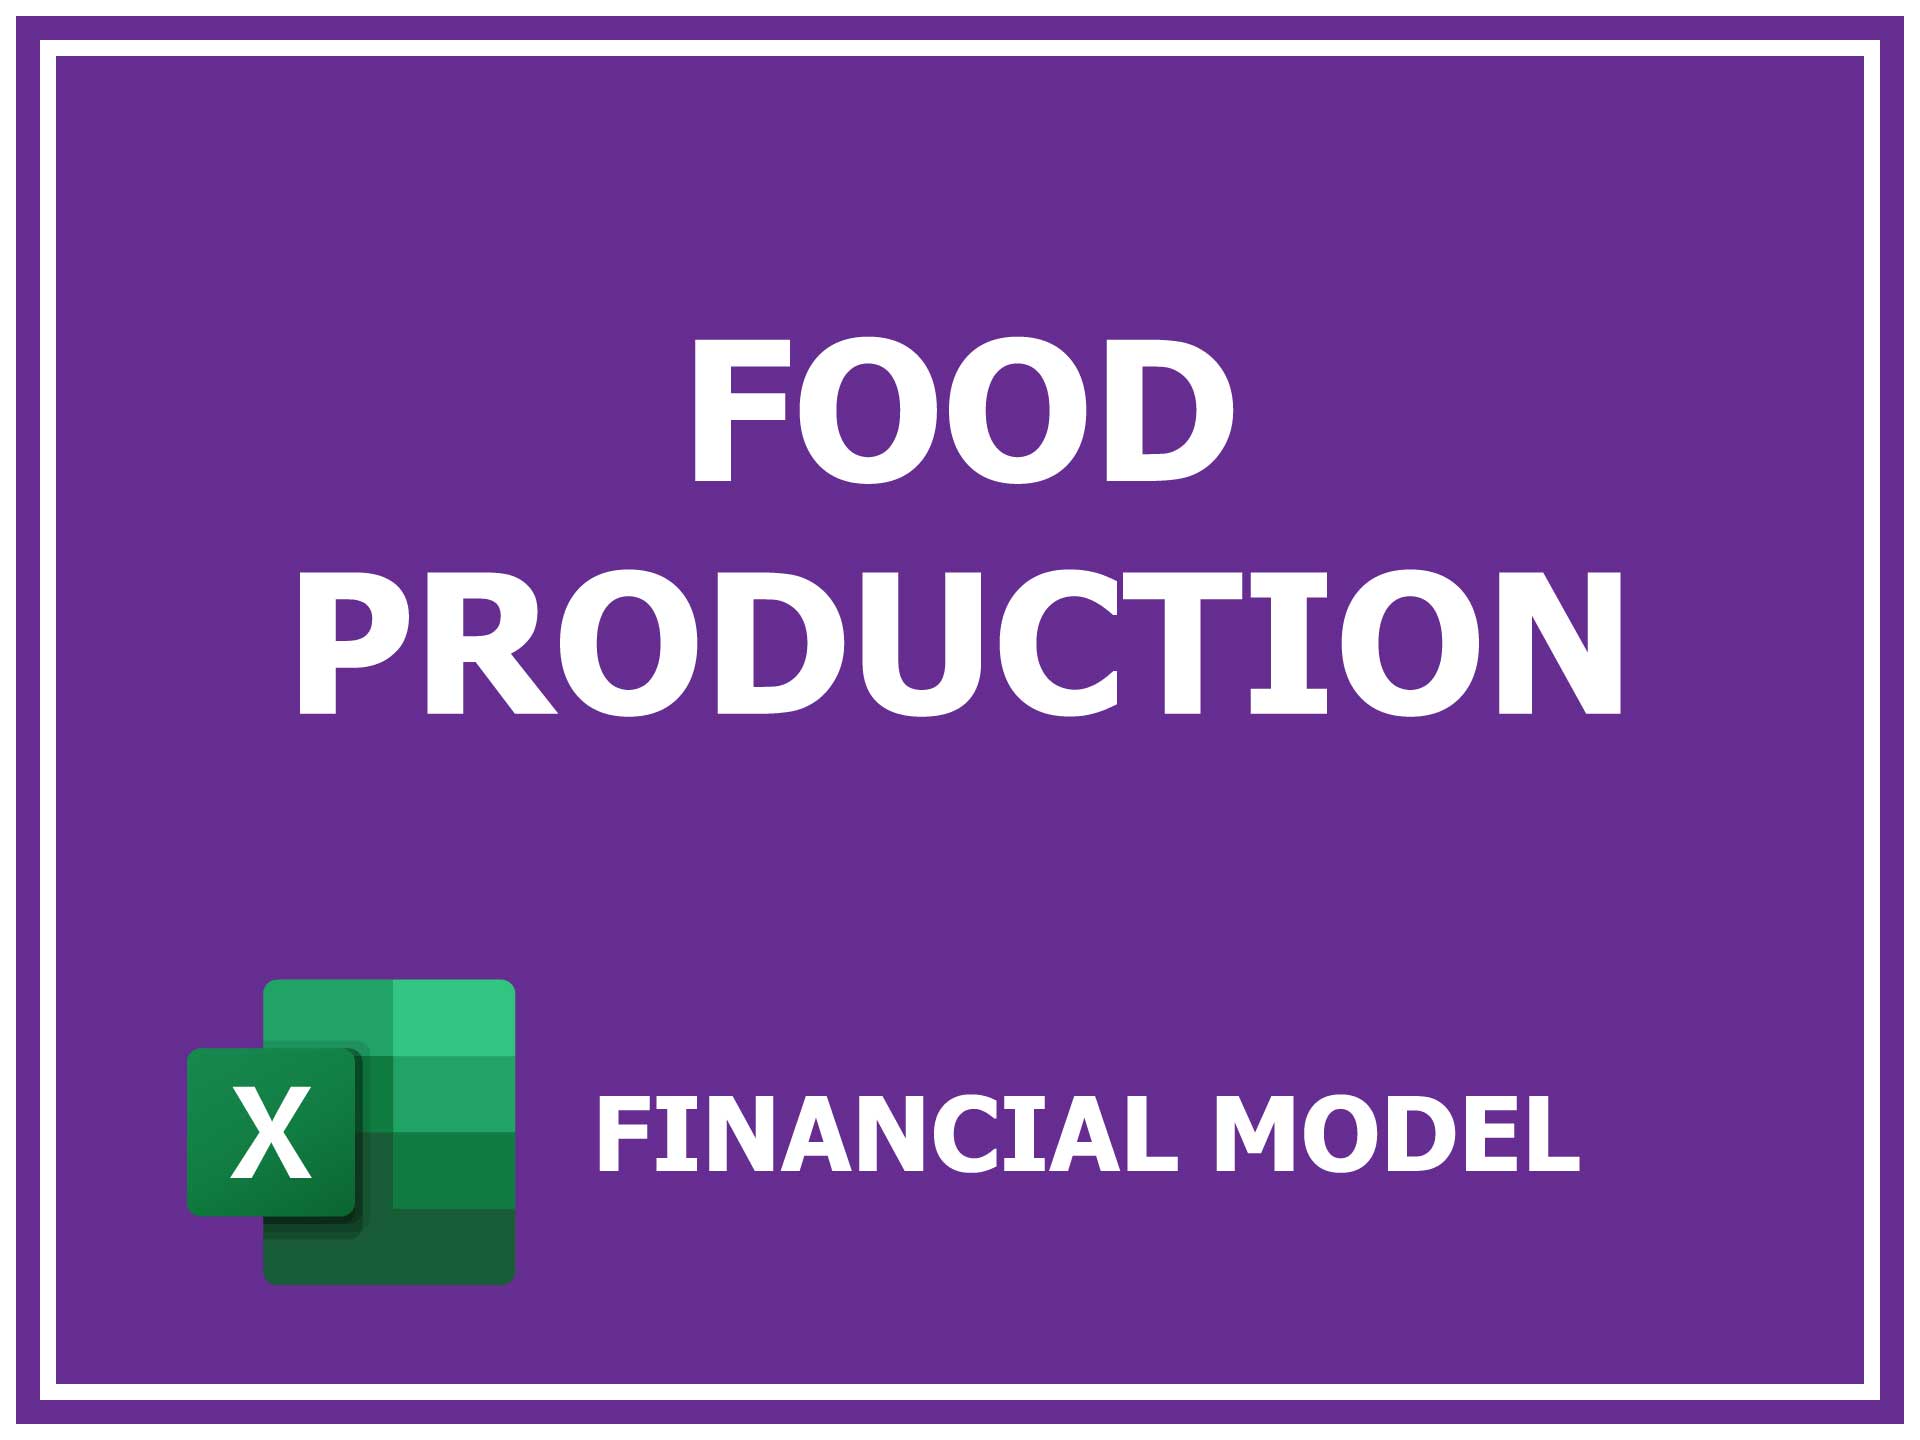 Food Production